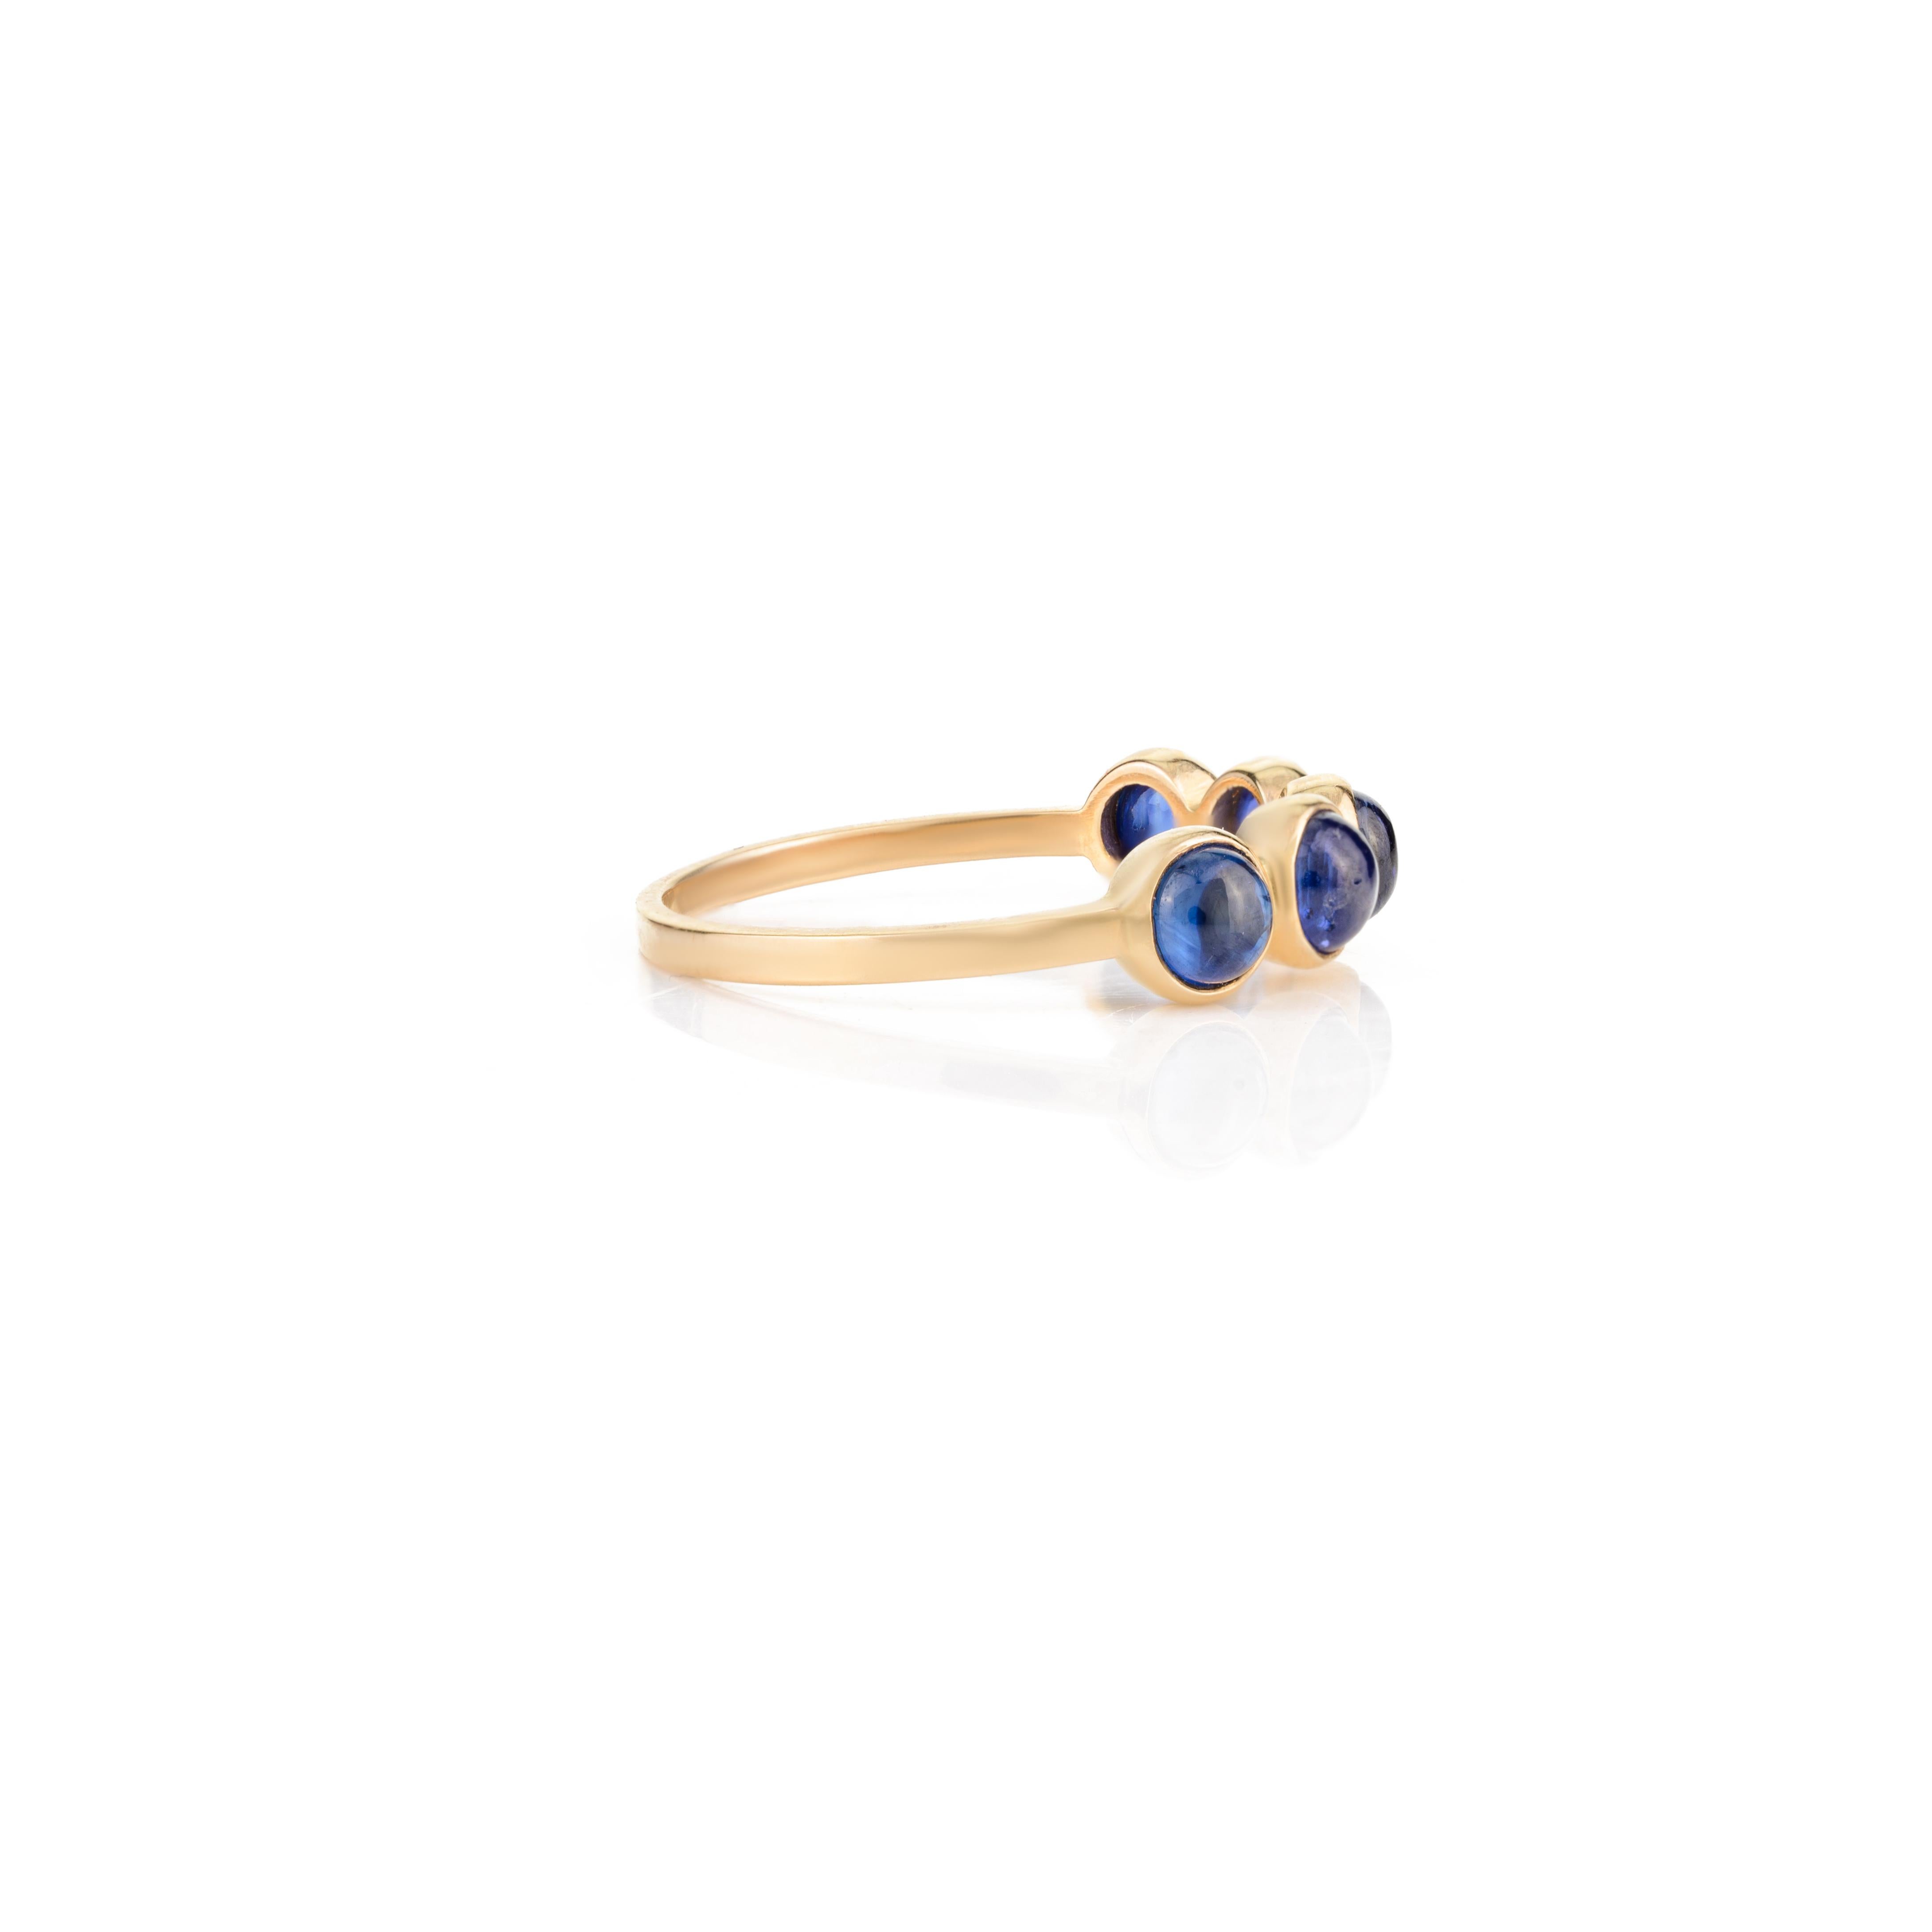 For Sale:  Blue Sapphire Bezel Set Band Stacking Ring in 14k Solid Yellow Gold Gift for Her 3